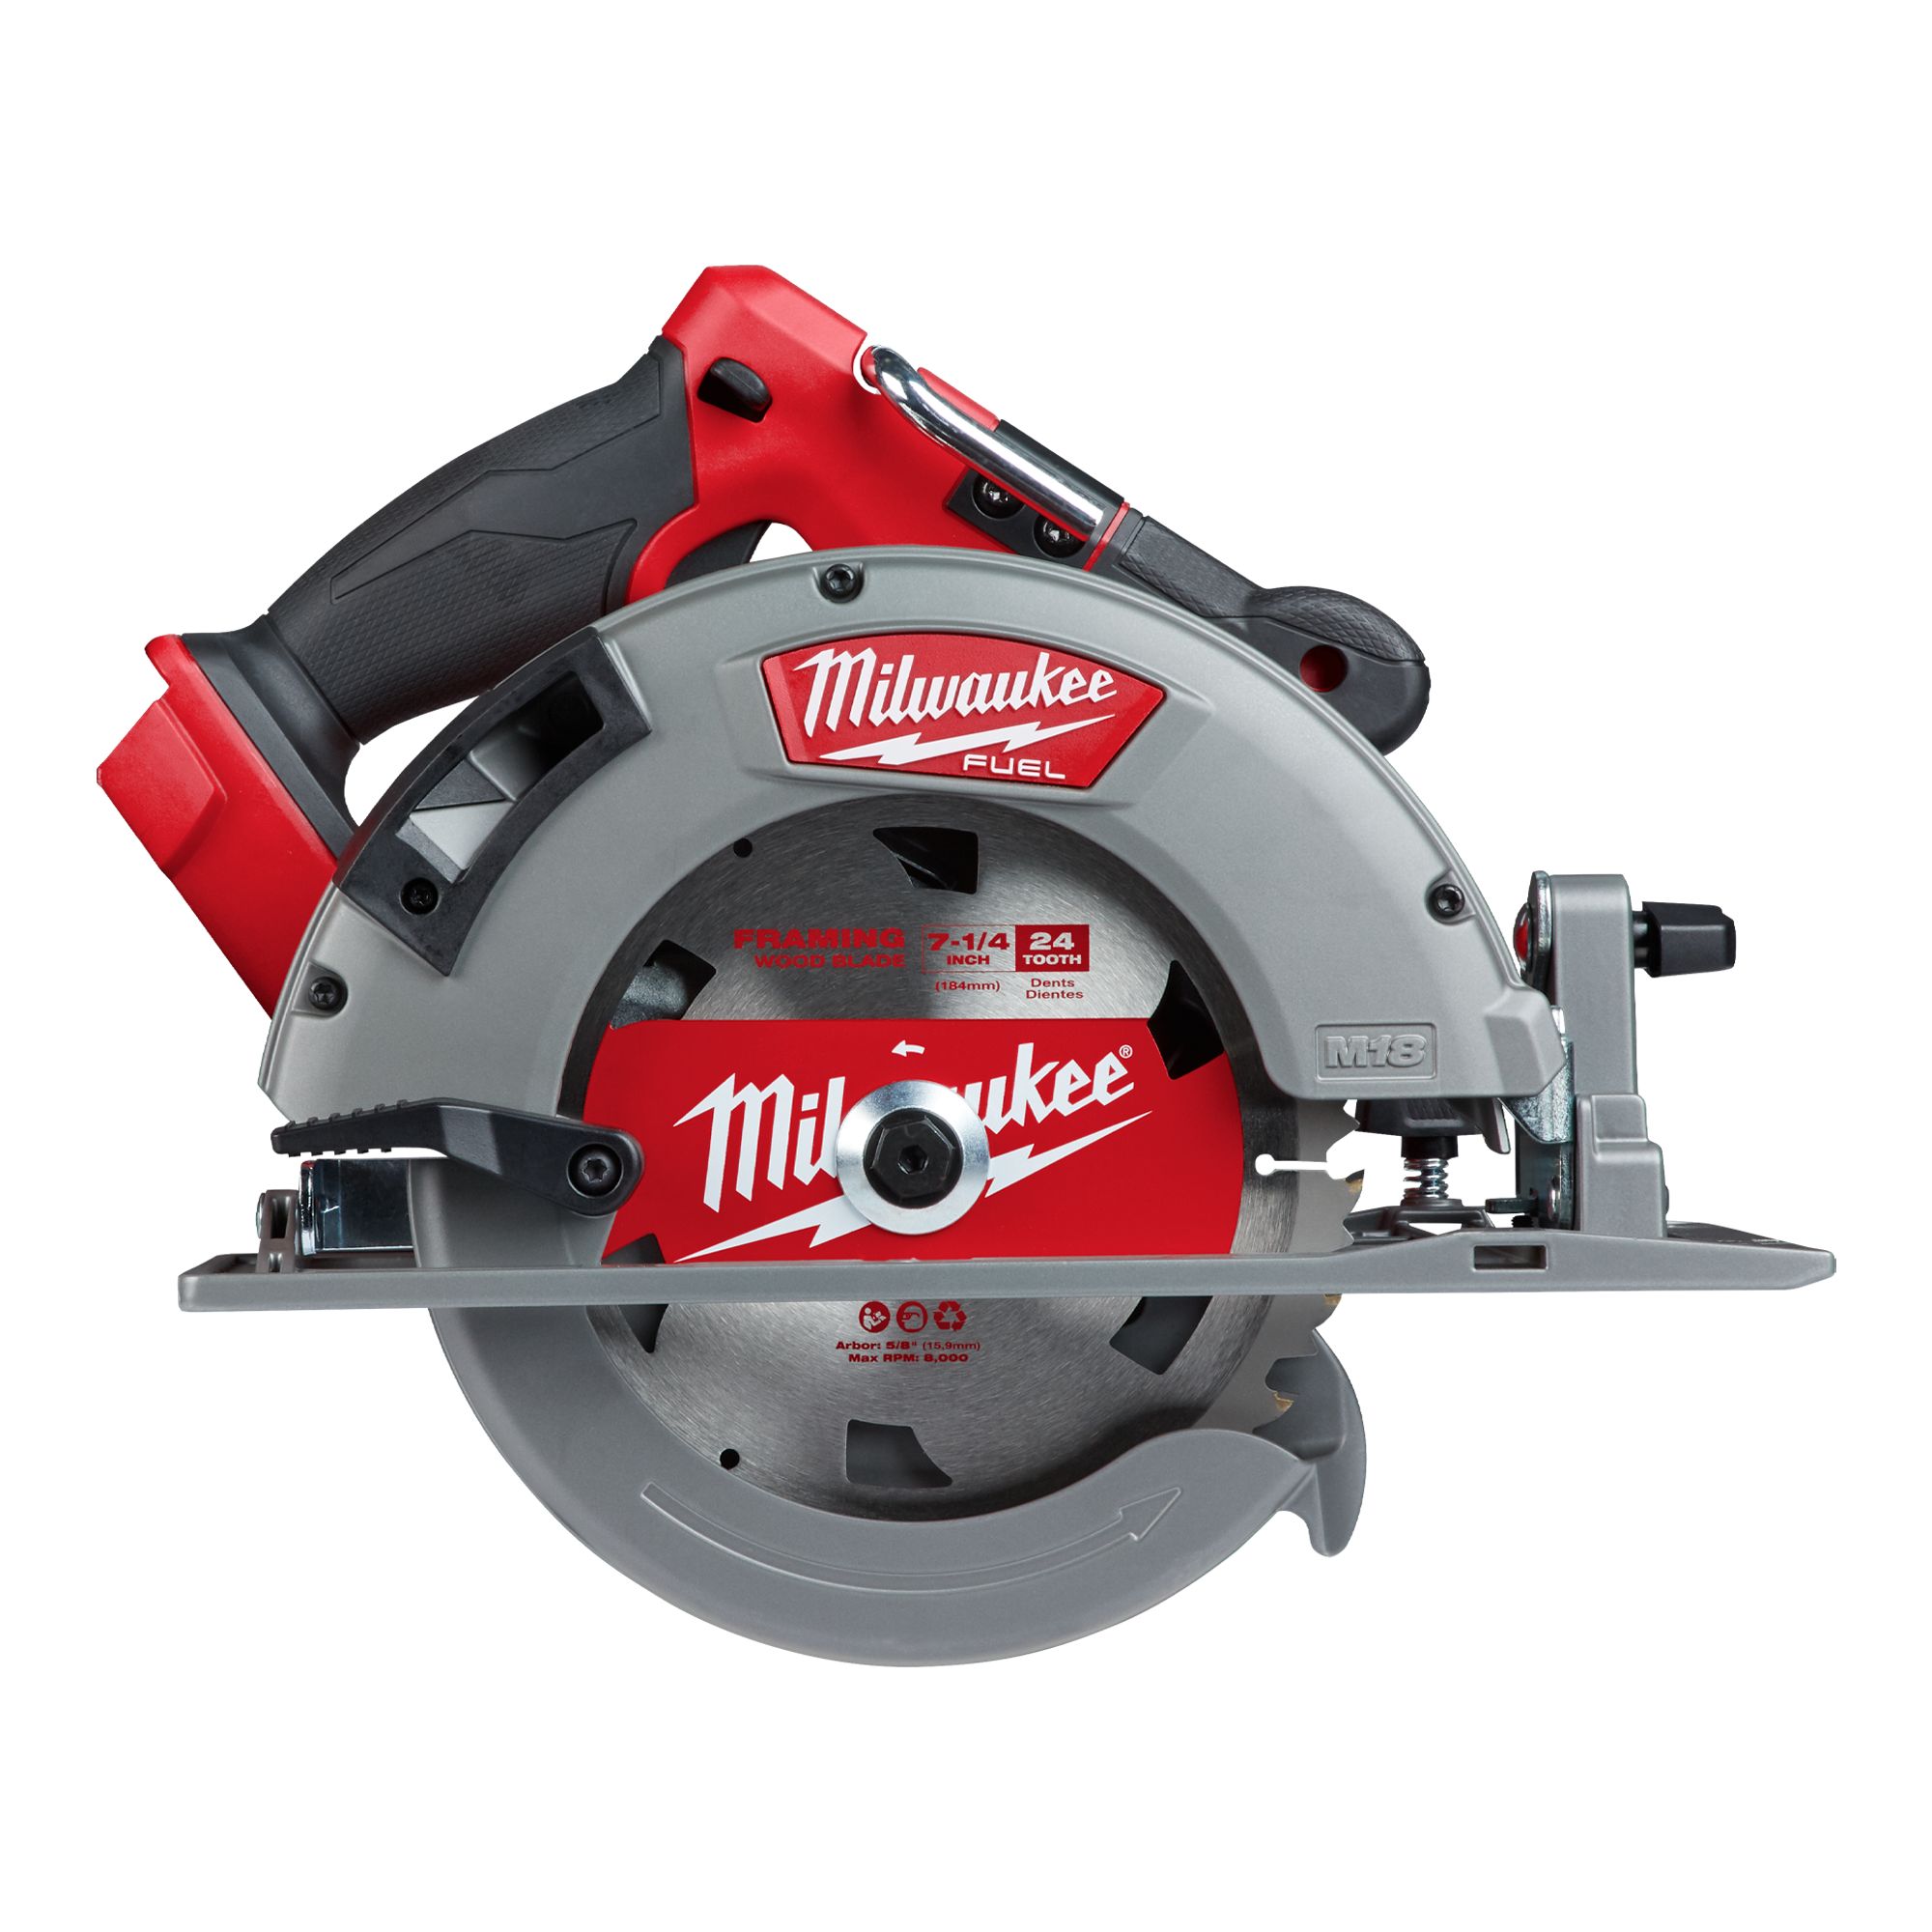 M18 FUEL™ 7-1/4" Circular Saw - Tool Only